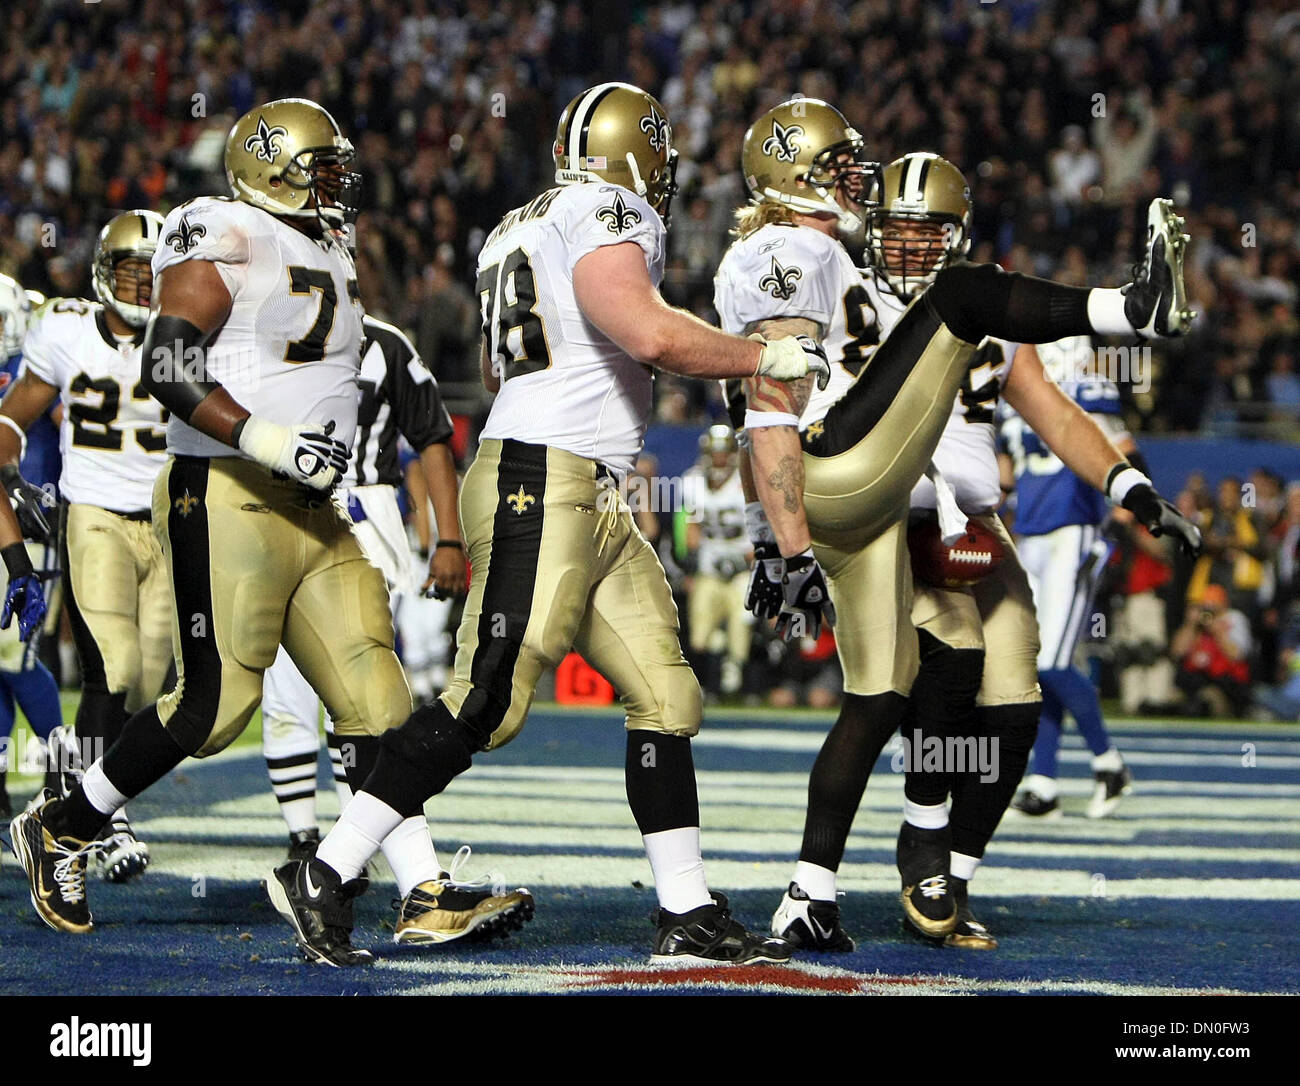 500 Jeremy shockey Stock Pictures, Editorial Images and Stock